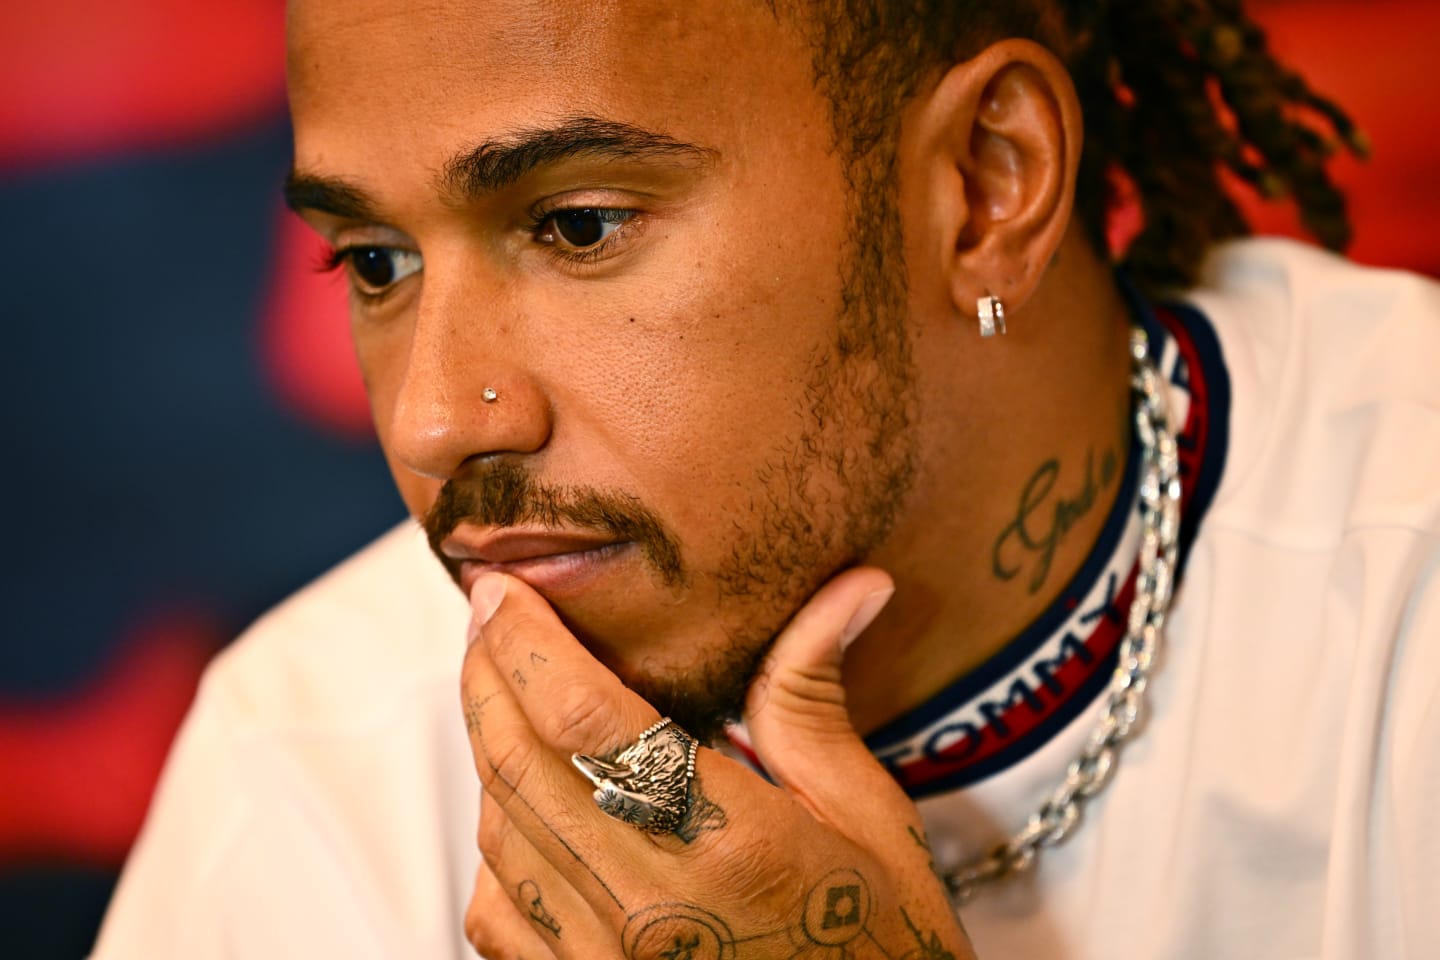 MONTE-CARLO, MONACO - MAY 27: Lewis Hamilton of Great Britain and Mercedes looks on in the Drivers Press Conference prior to practice ahead of the F1 Grand Prix of Monaco at Circuit de Monaco on May 27, 2022 in Monte-Carlo, Monaco. (Photo by Clive Mason/Getty Images)